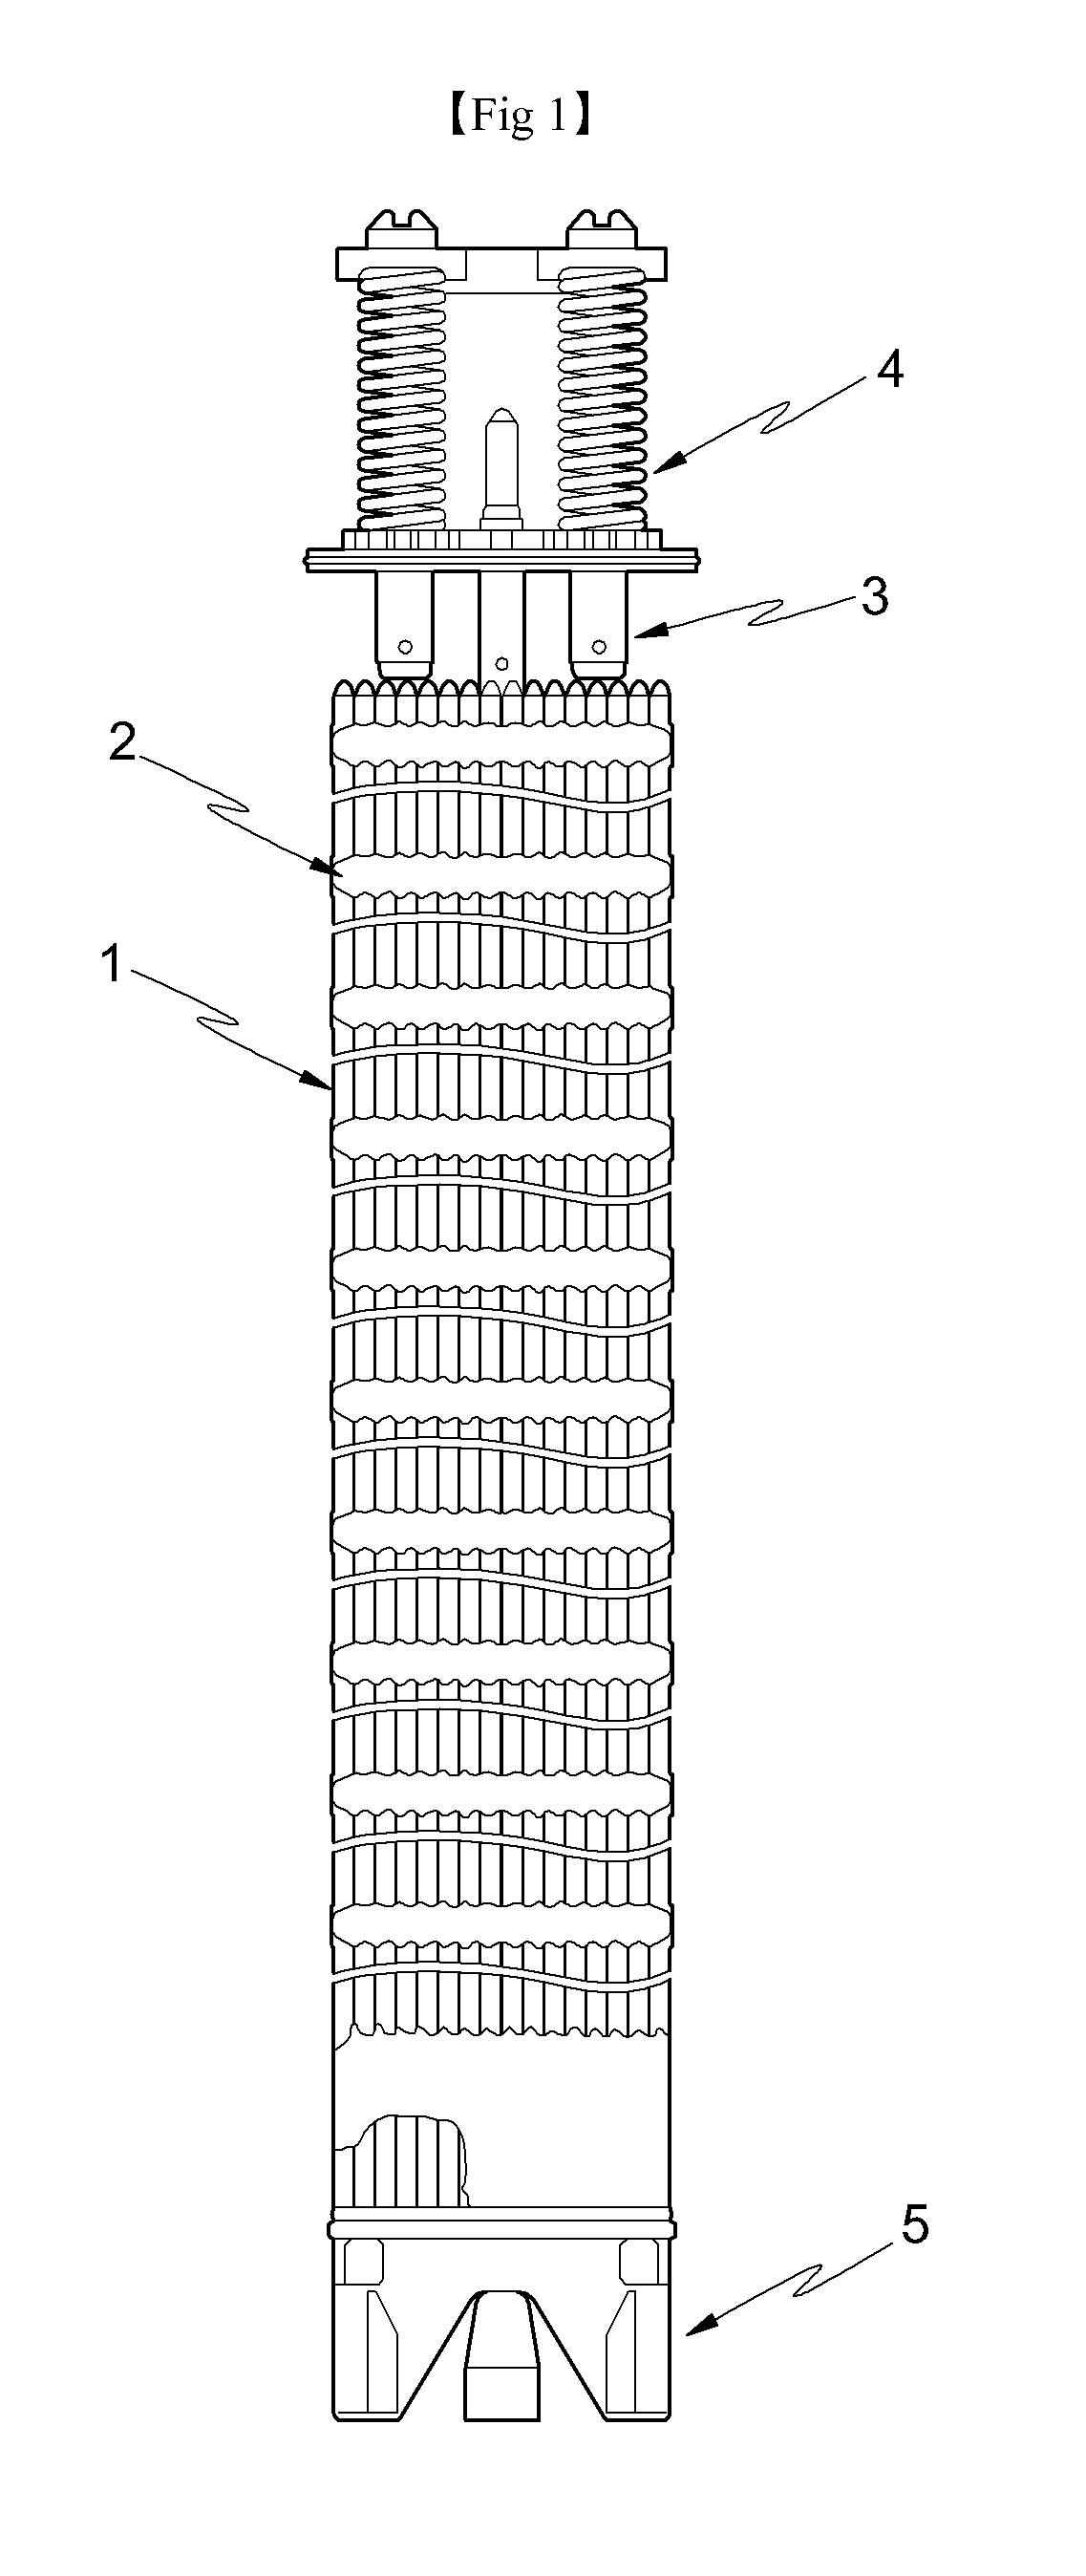 Anti-fretting Wear Spacer Grid With Canoe-Shaped Spring